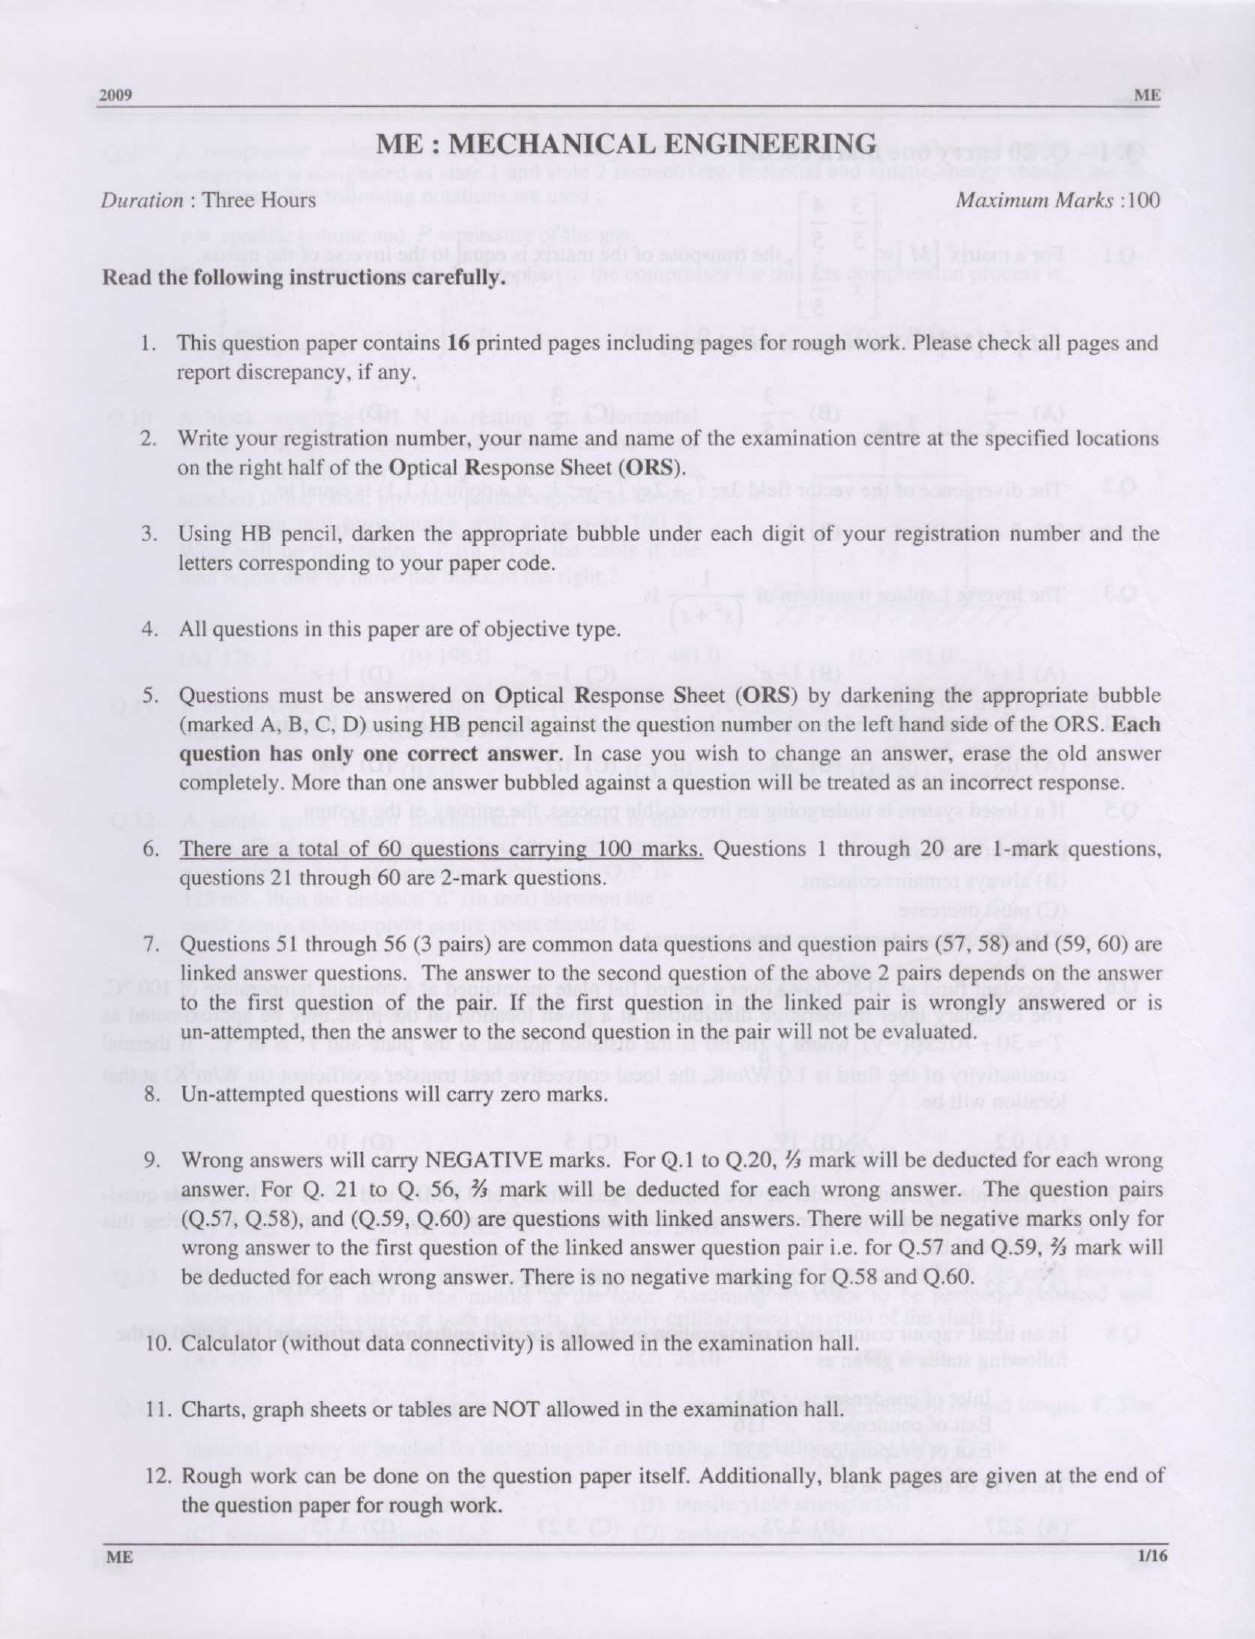 GATE Exam Question Paper 2009 Mechanical Engineering 1